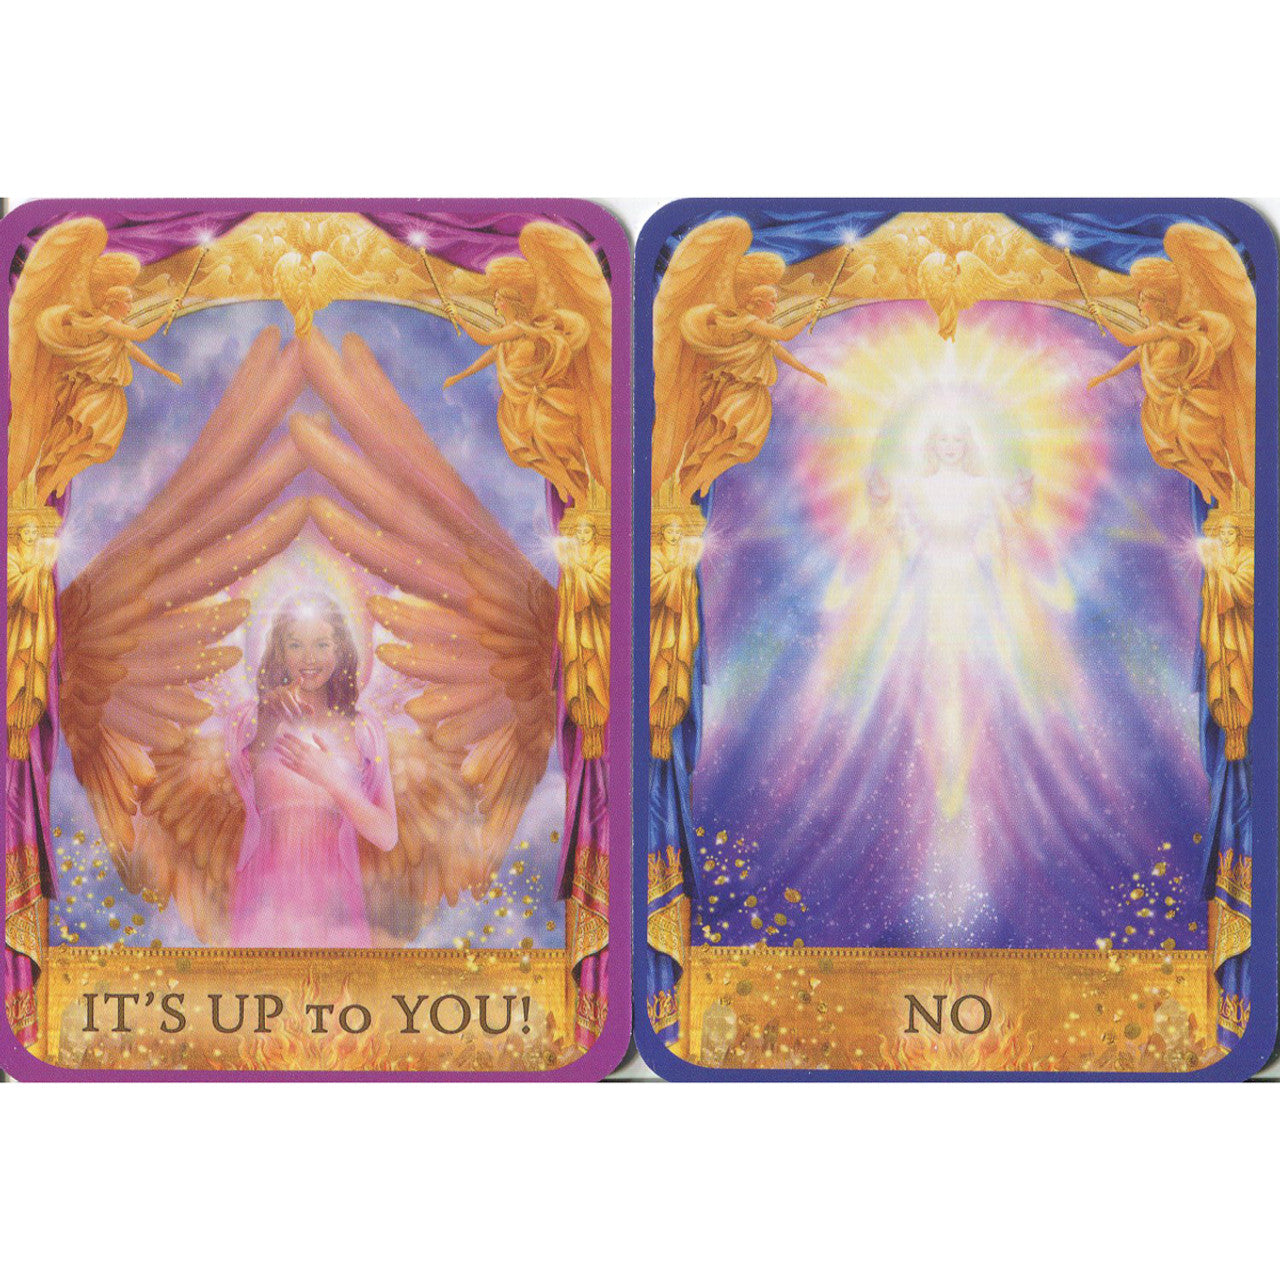 Angel answers oracle cards